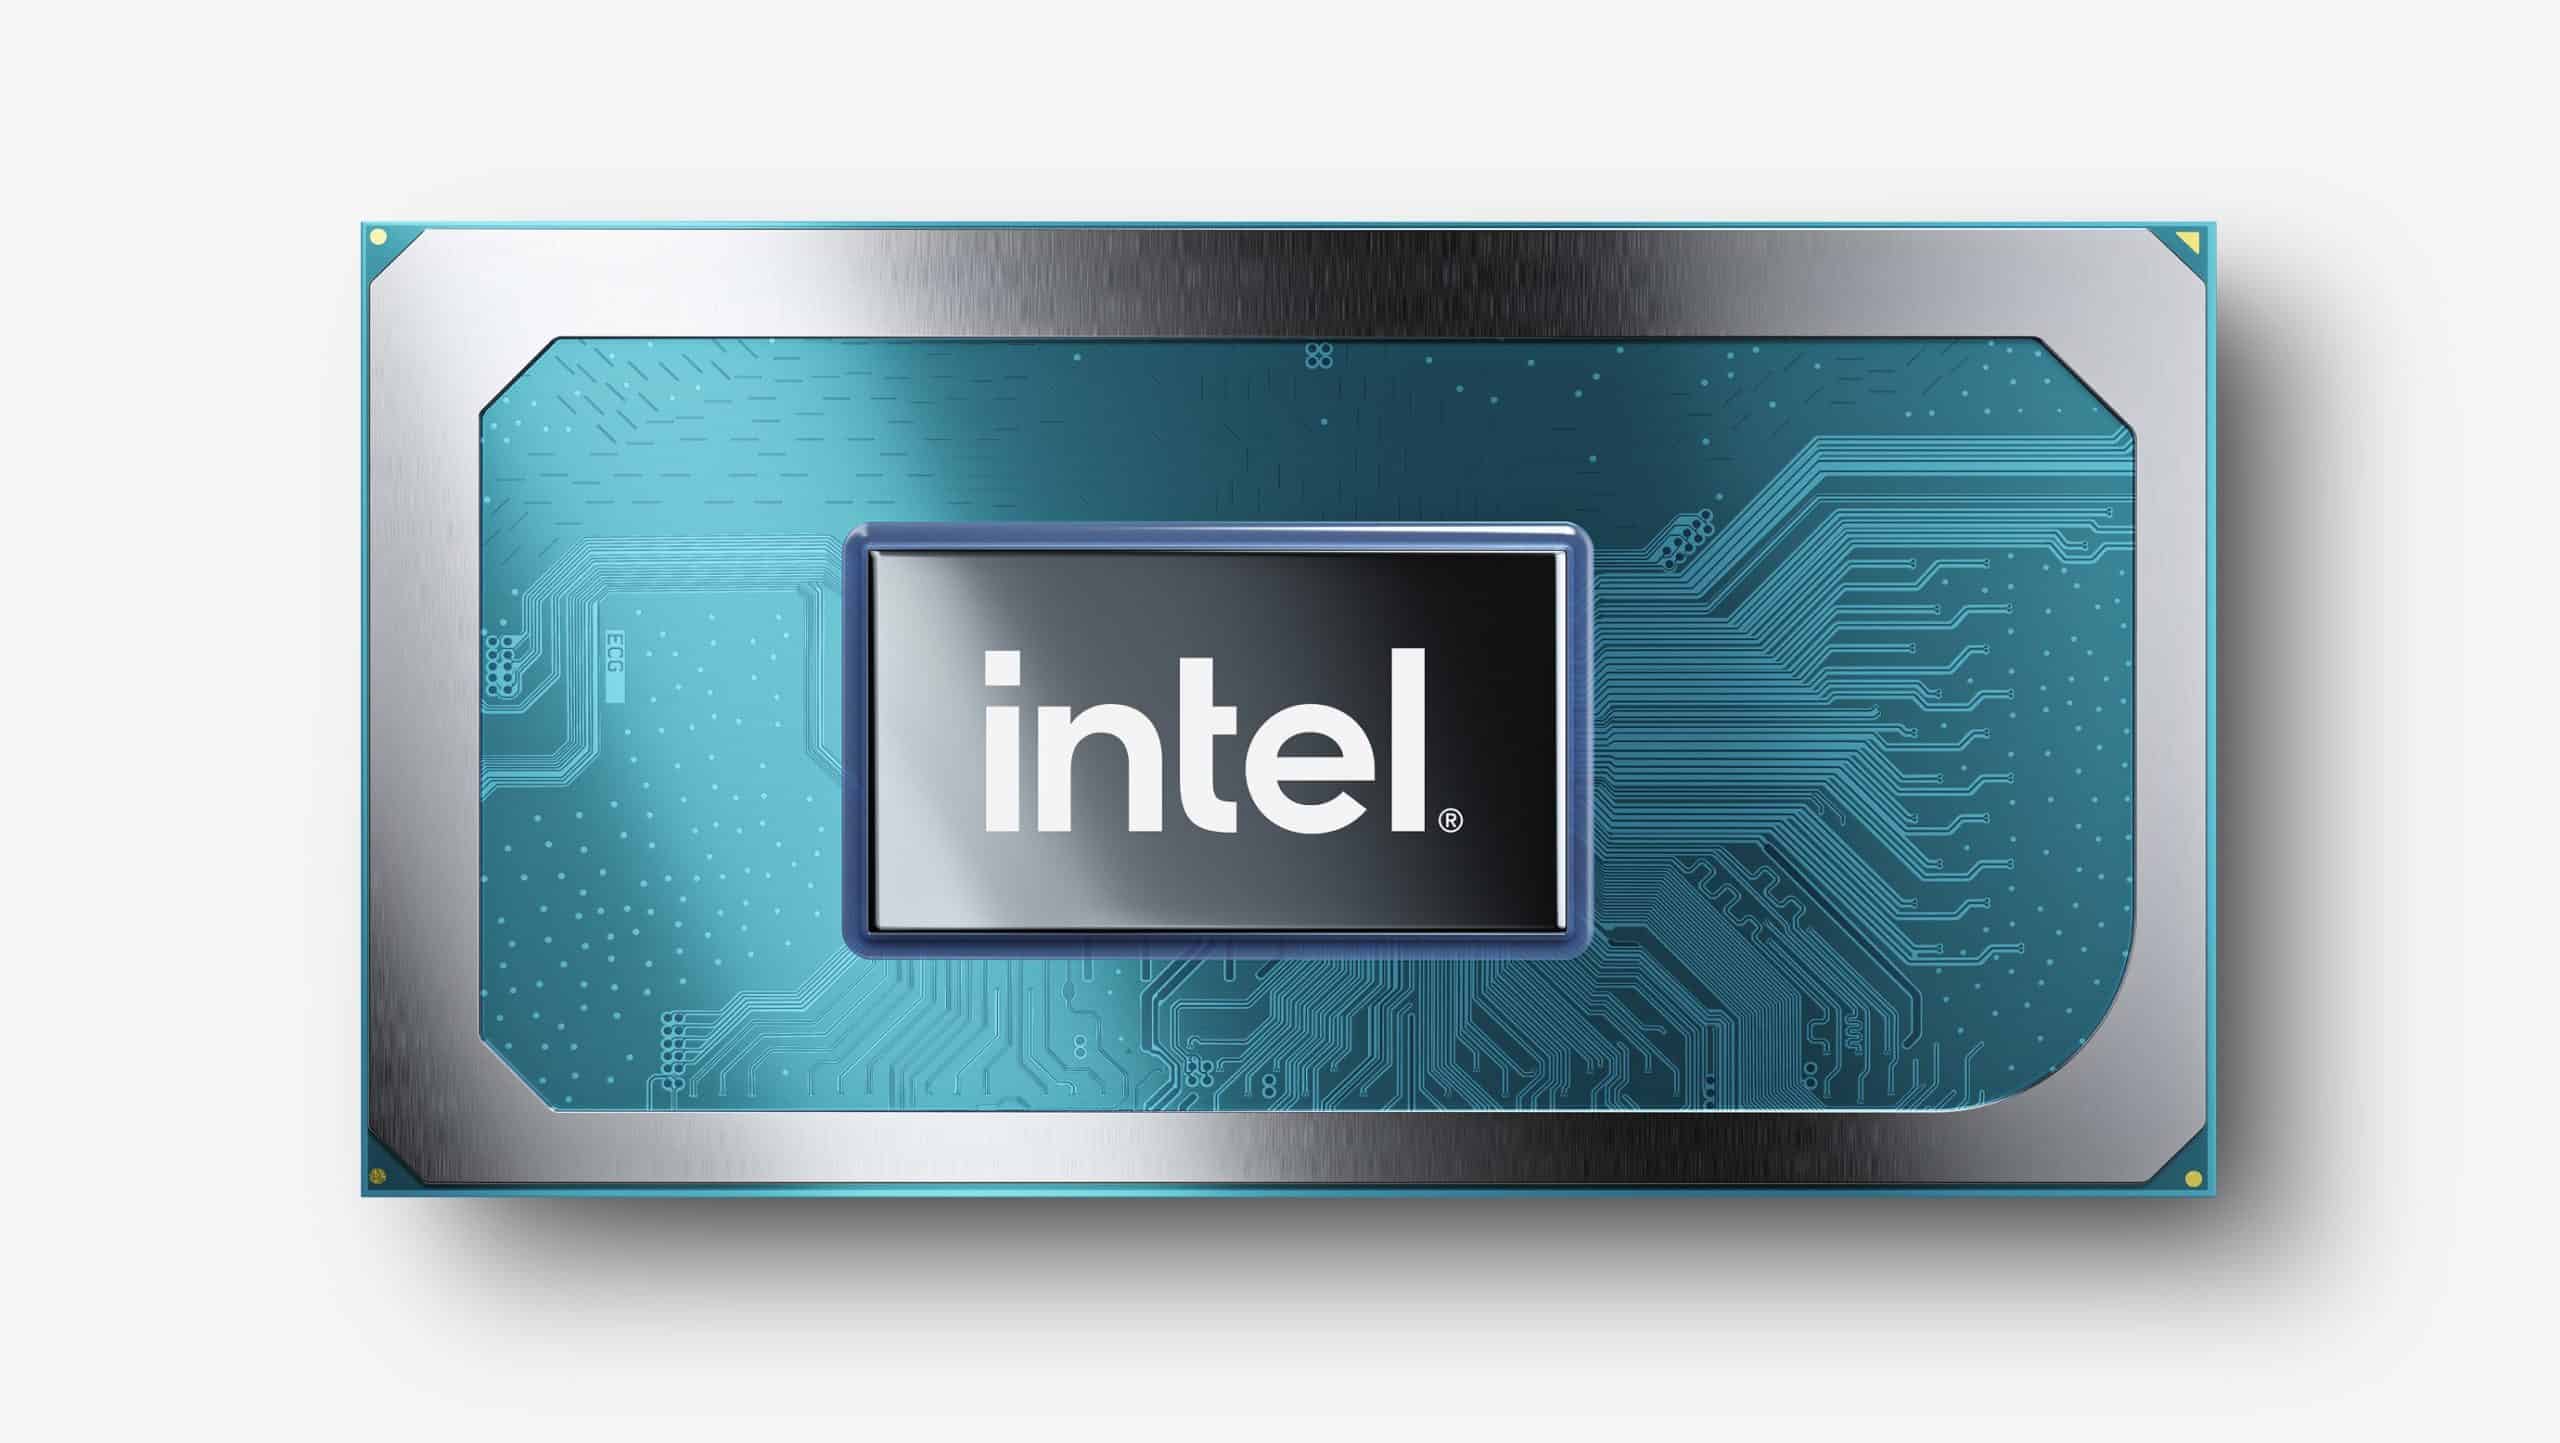 Intel Launches New 11th Gen Core for Mobile devices